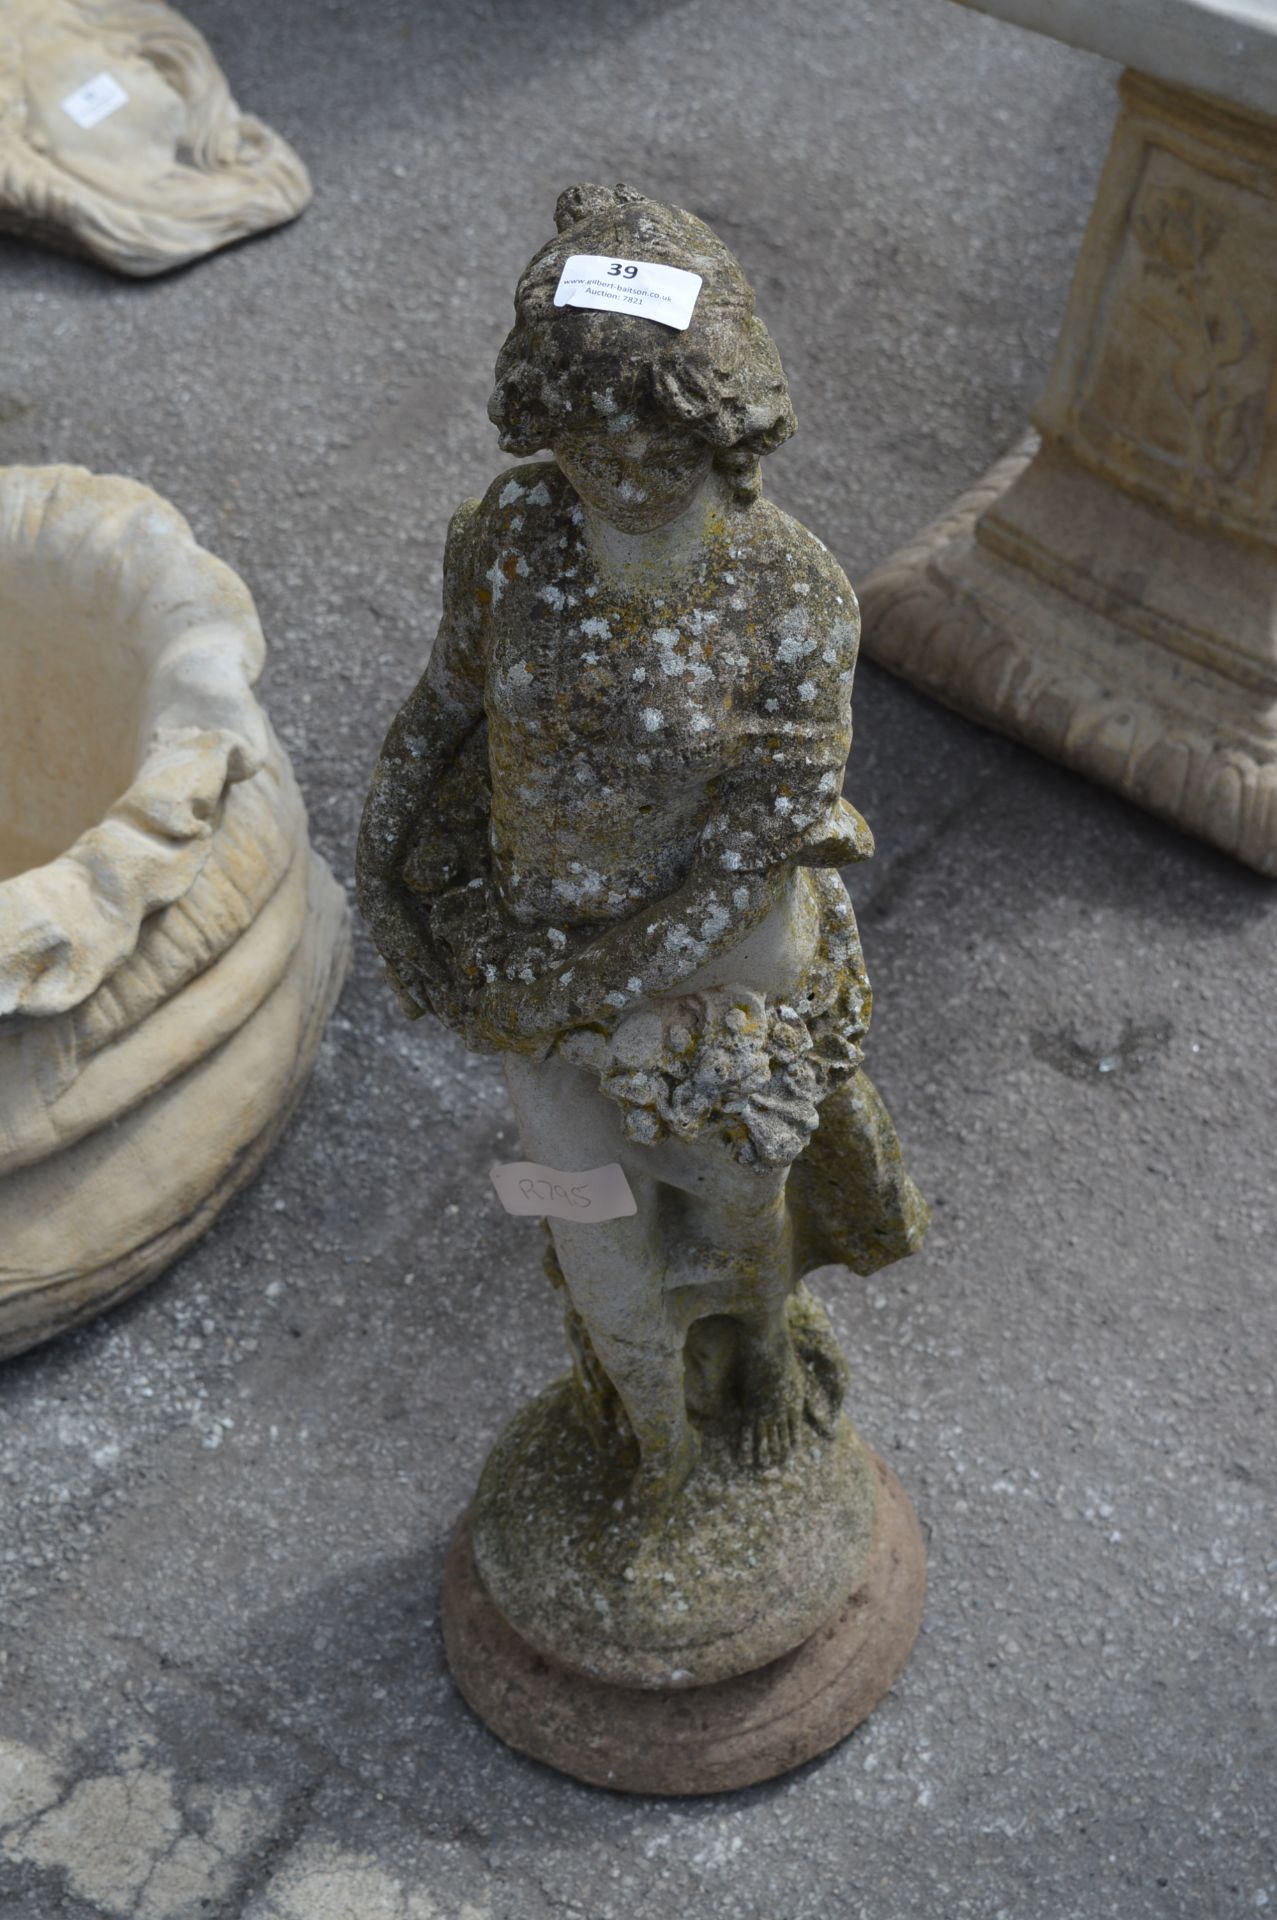 Concrete Garden Figure "Girl with Flowers"